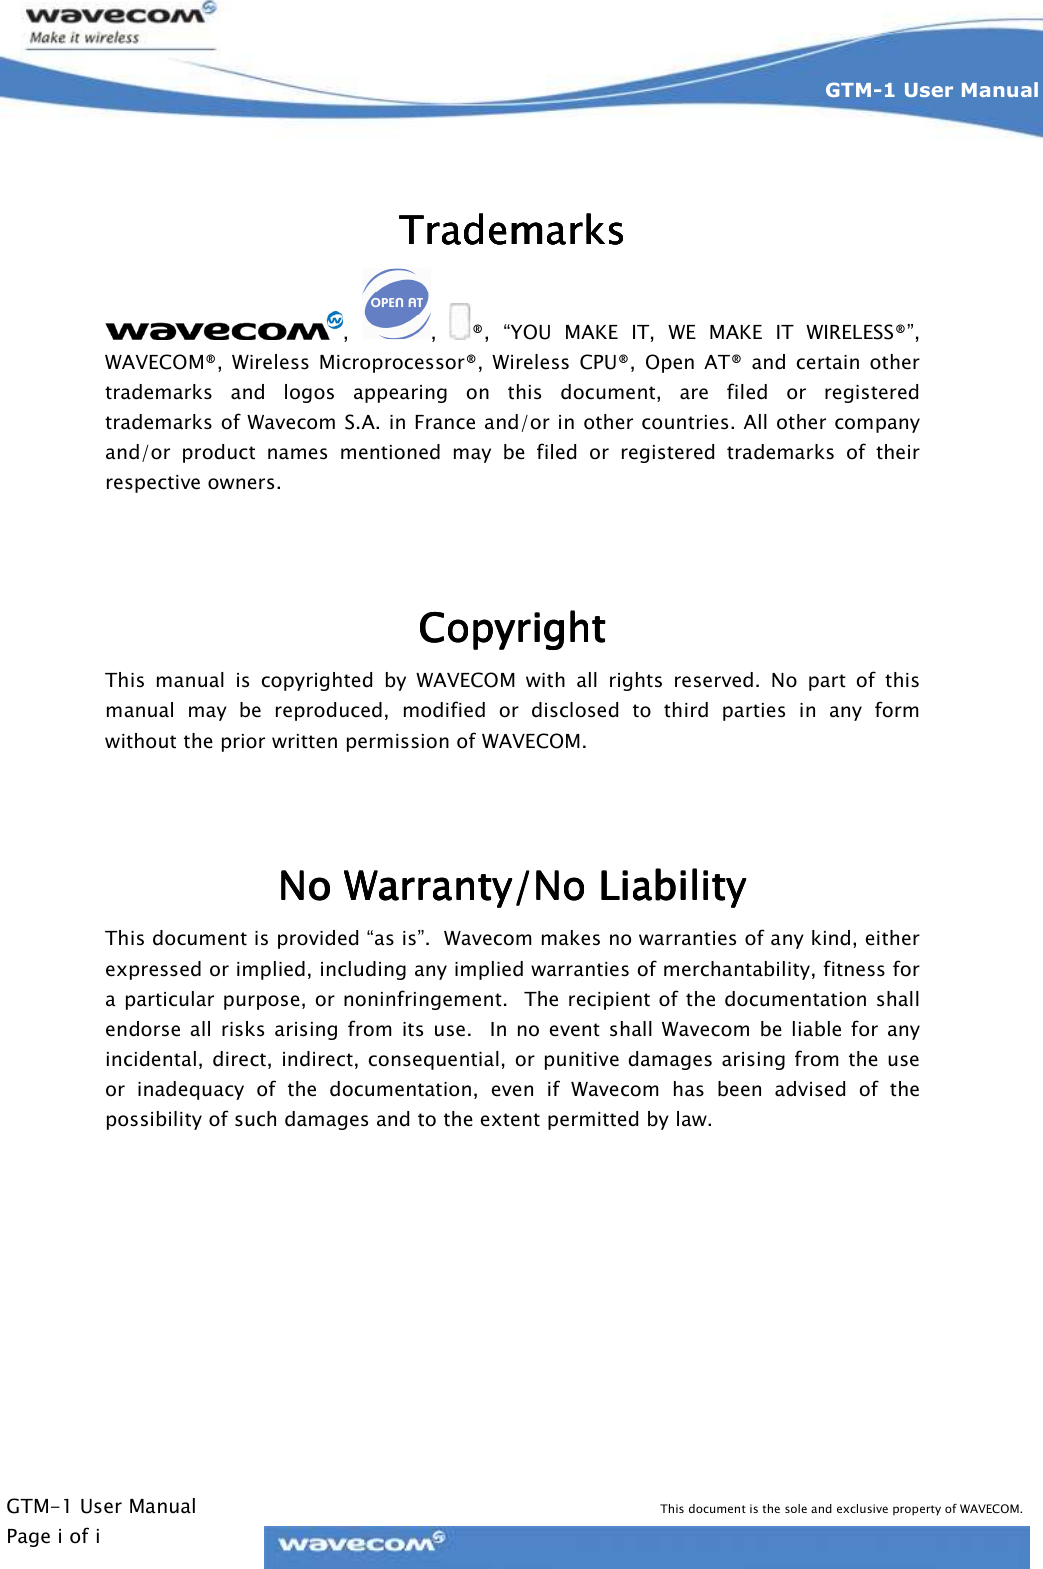    GTM-1 User Manual This document is the sole and exclusive property of WAVECOM. Page i of i GTM-1 User Manual      TrademarksTrademarksTrademarksTrademarks    ,  ,  ®,  “YOU  MAKE  IT,  WE  MAKE  IT  WIRELESS®”, WAVECOM®,  Wireless  Microprocessor®,  Wireless  CPU®,  Open  AT®  and  certain  other trademarks  and  logos  appearing  on  this  document,  are  filed  or  registered trademarks of Wavecom S.A. in France and/or in other countries. All other company and/or  product  names  mentioned  may  be  filed  or  registered  trademarks  of  their respective owners.   CopyrightCopyrightCopyrightCopyright    This  manual  is  copyrighted  by  WAVECOM  with  all  rights  reserved.  No  part  of  this manual  may  be  reproduced,  modified  or  disclosed  to  third  parties  in  any  form without the prior written permission of WAVECOM.   No Warranty/No LiabilityNo Warranty/No LiabilityNo Warranty/No LiabilityNo Warranty/No Liability    This document is provided “as is”.  Wavecom makes no warranties of any kind, either expressed or implied, including any implied warranties of merchantability, fitness for a particular purpose, or noninfringement.  The recipient of the documentation shall endorse  all  risks  arising  from  its  use.    In no  event  shall  Wavecom  be liable for  any incidental,  direct,  indirect,  consequential, or punitive damages  arising from the use or  inadequacy  of  the  documentation,  even  if  Wavecom  has  been  advised  of  the possibility of such damages and to the extent permitted by law.   